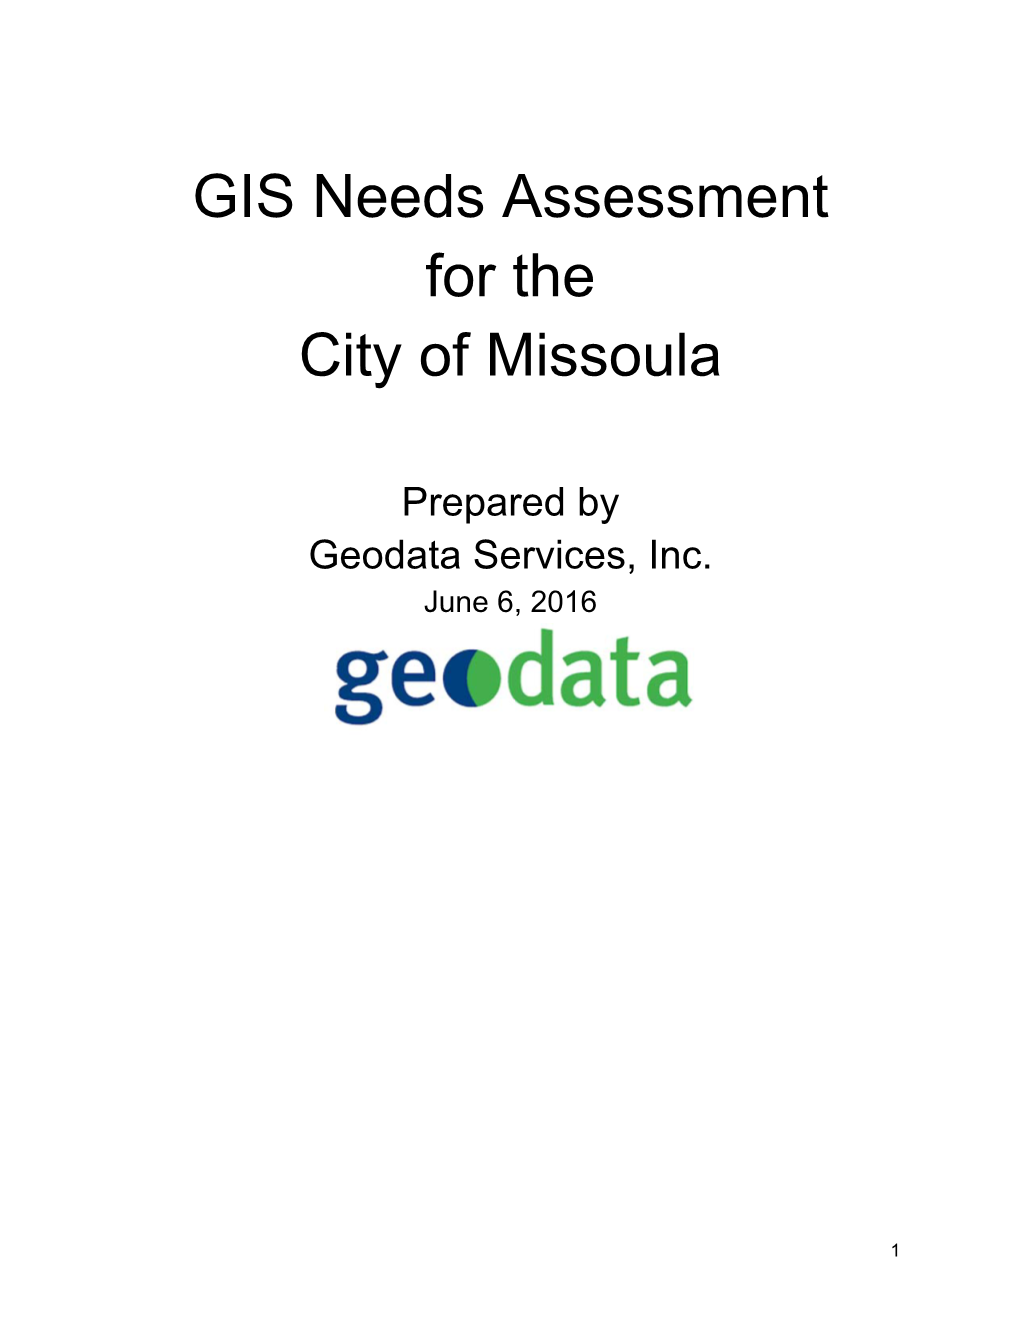 GIS Needs Assessment for the City of Missoula